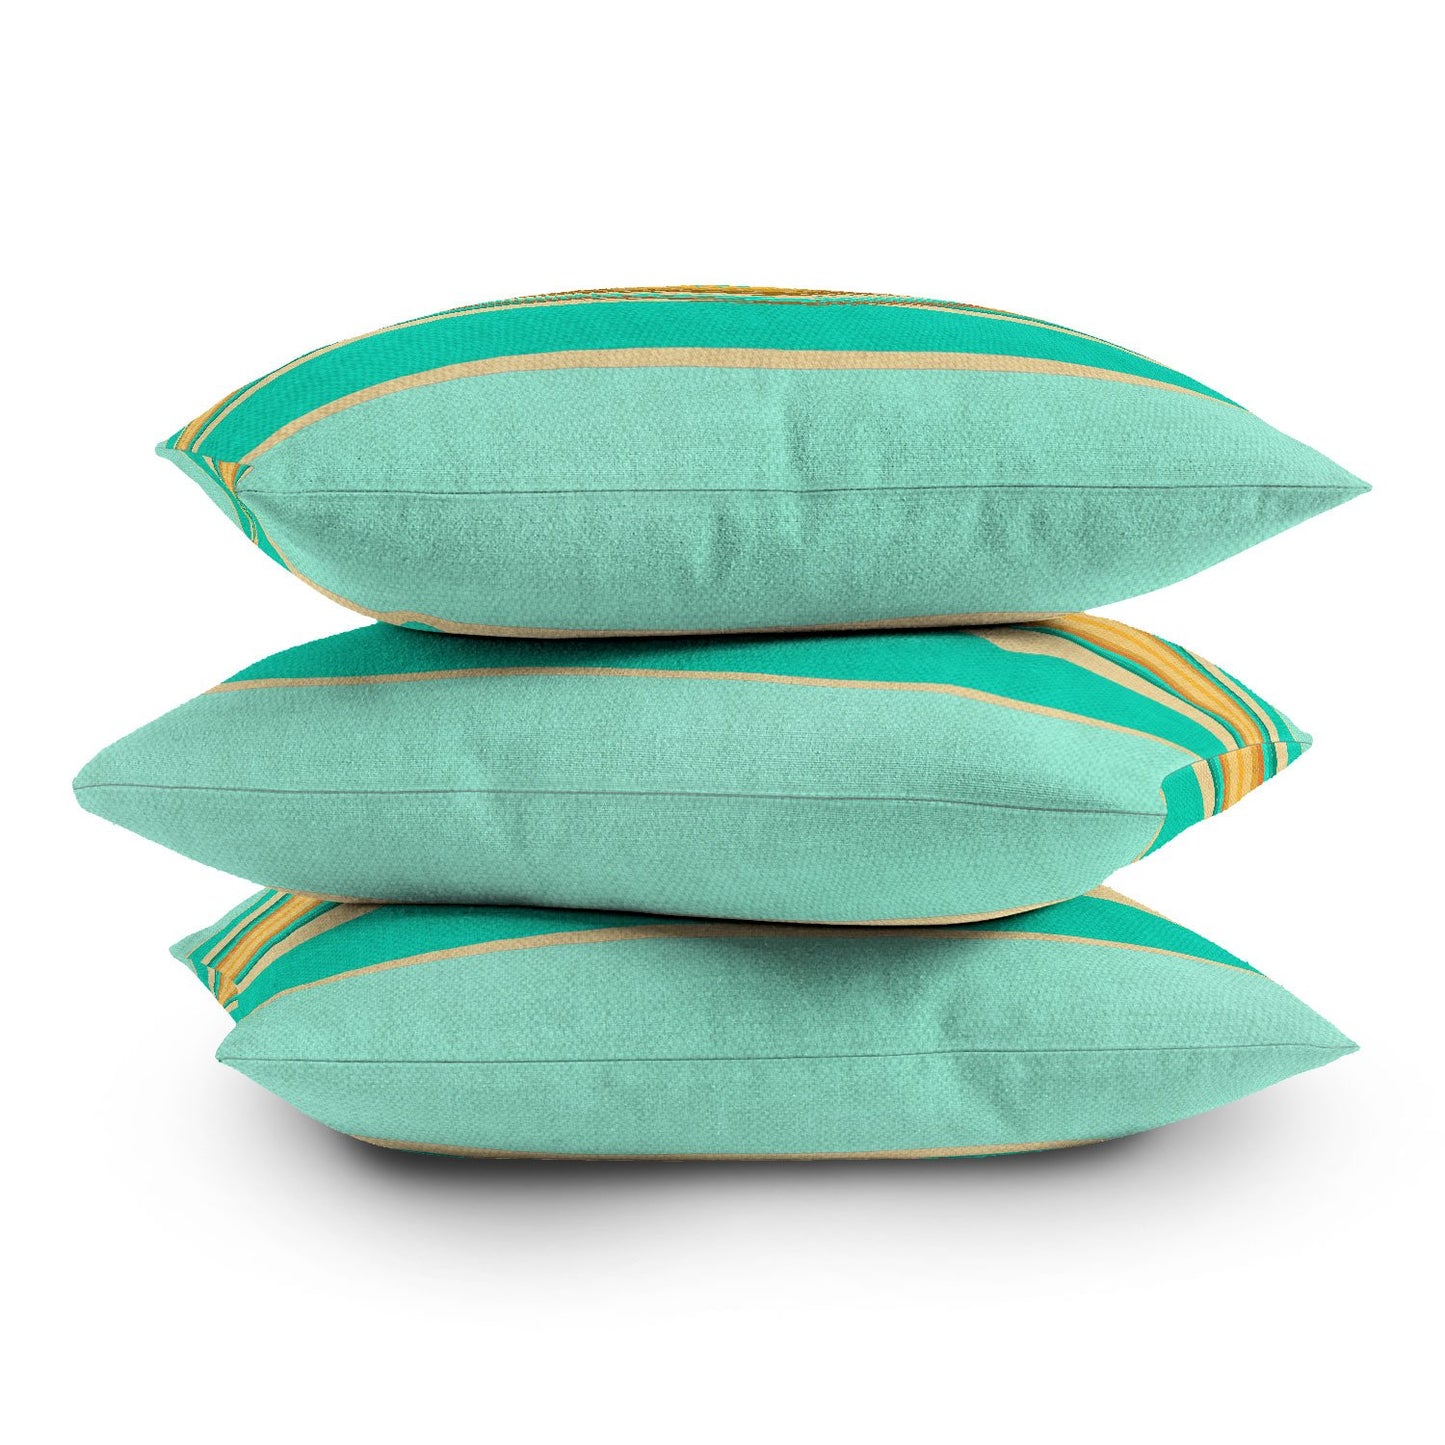 Turquoise Aztec PILLOW Choice of Sizes